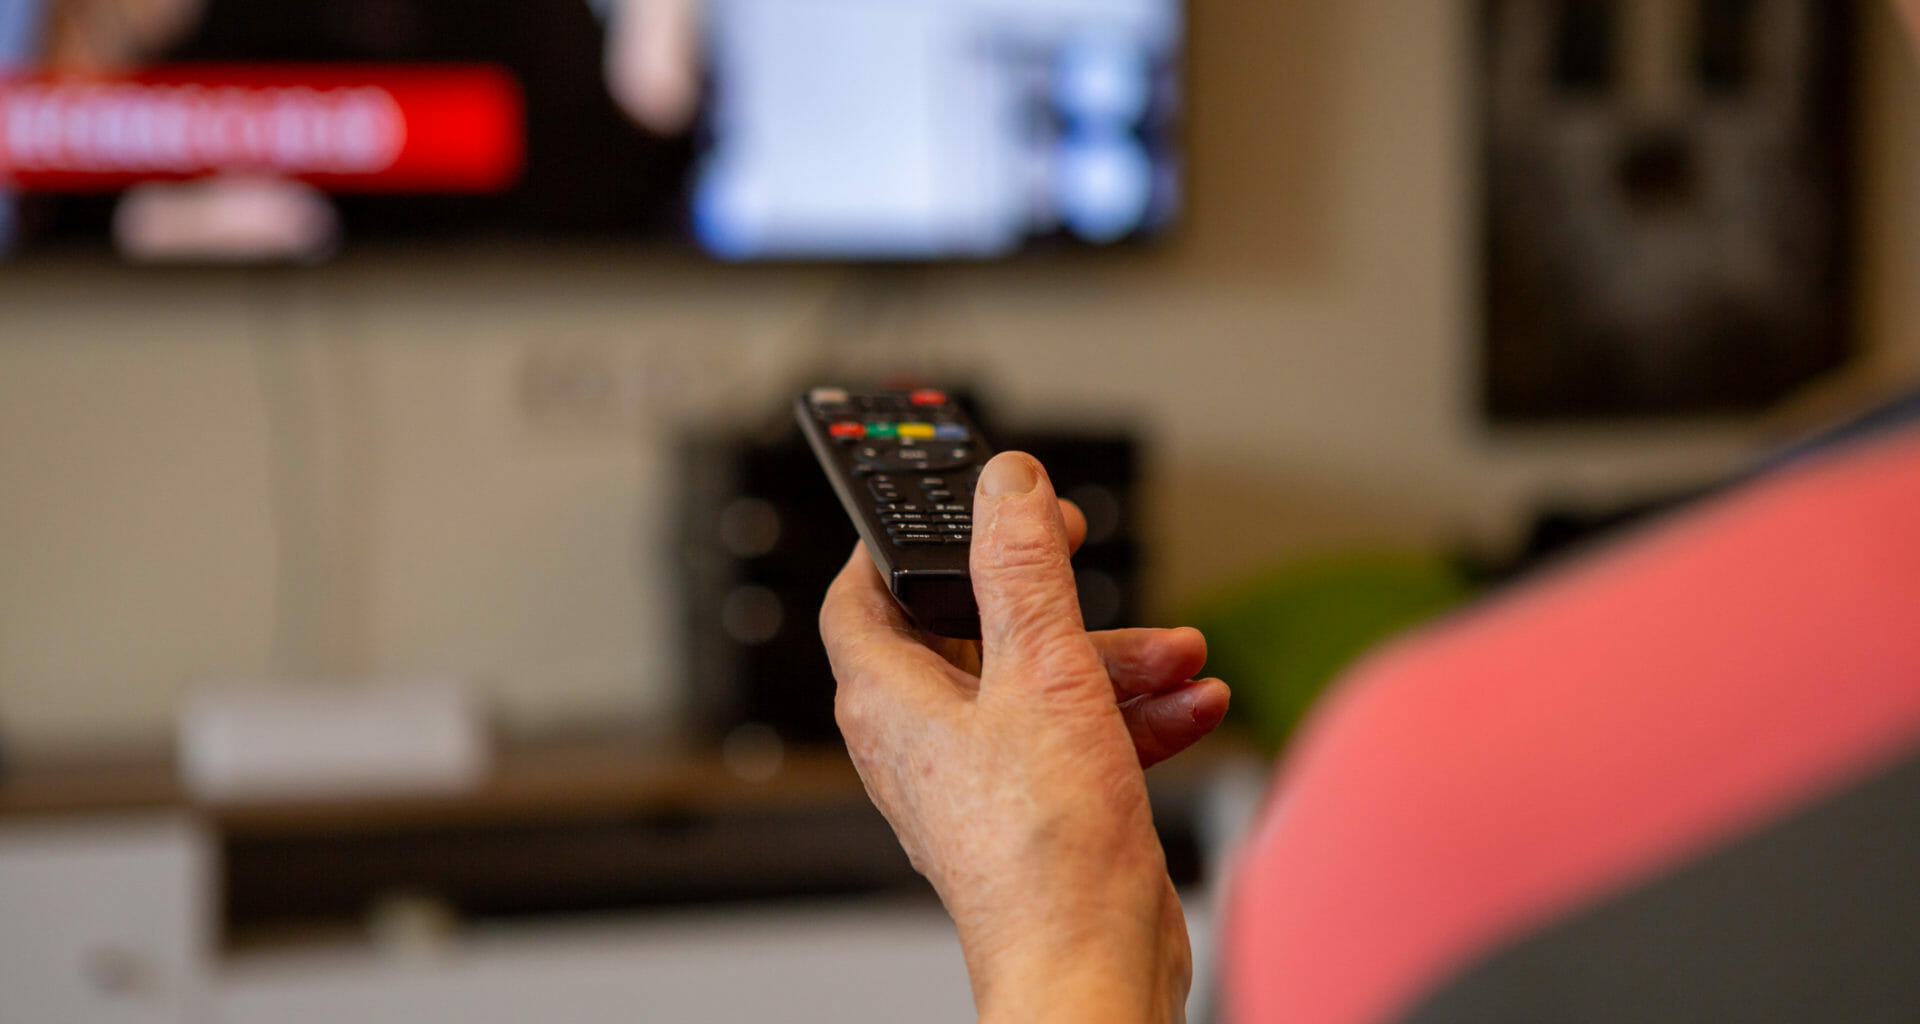 Claim Scotland has "lowest amount" of TV licence payment is Unsupported 1